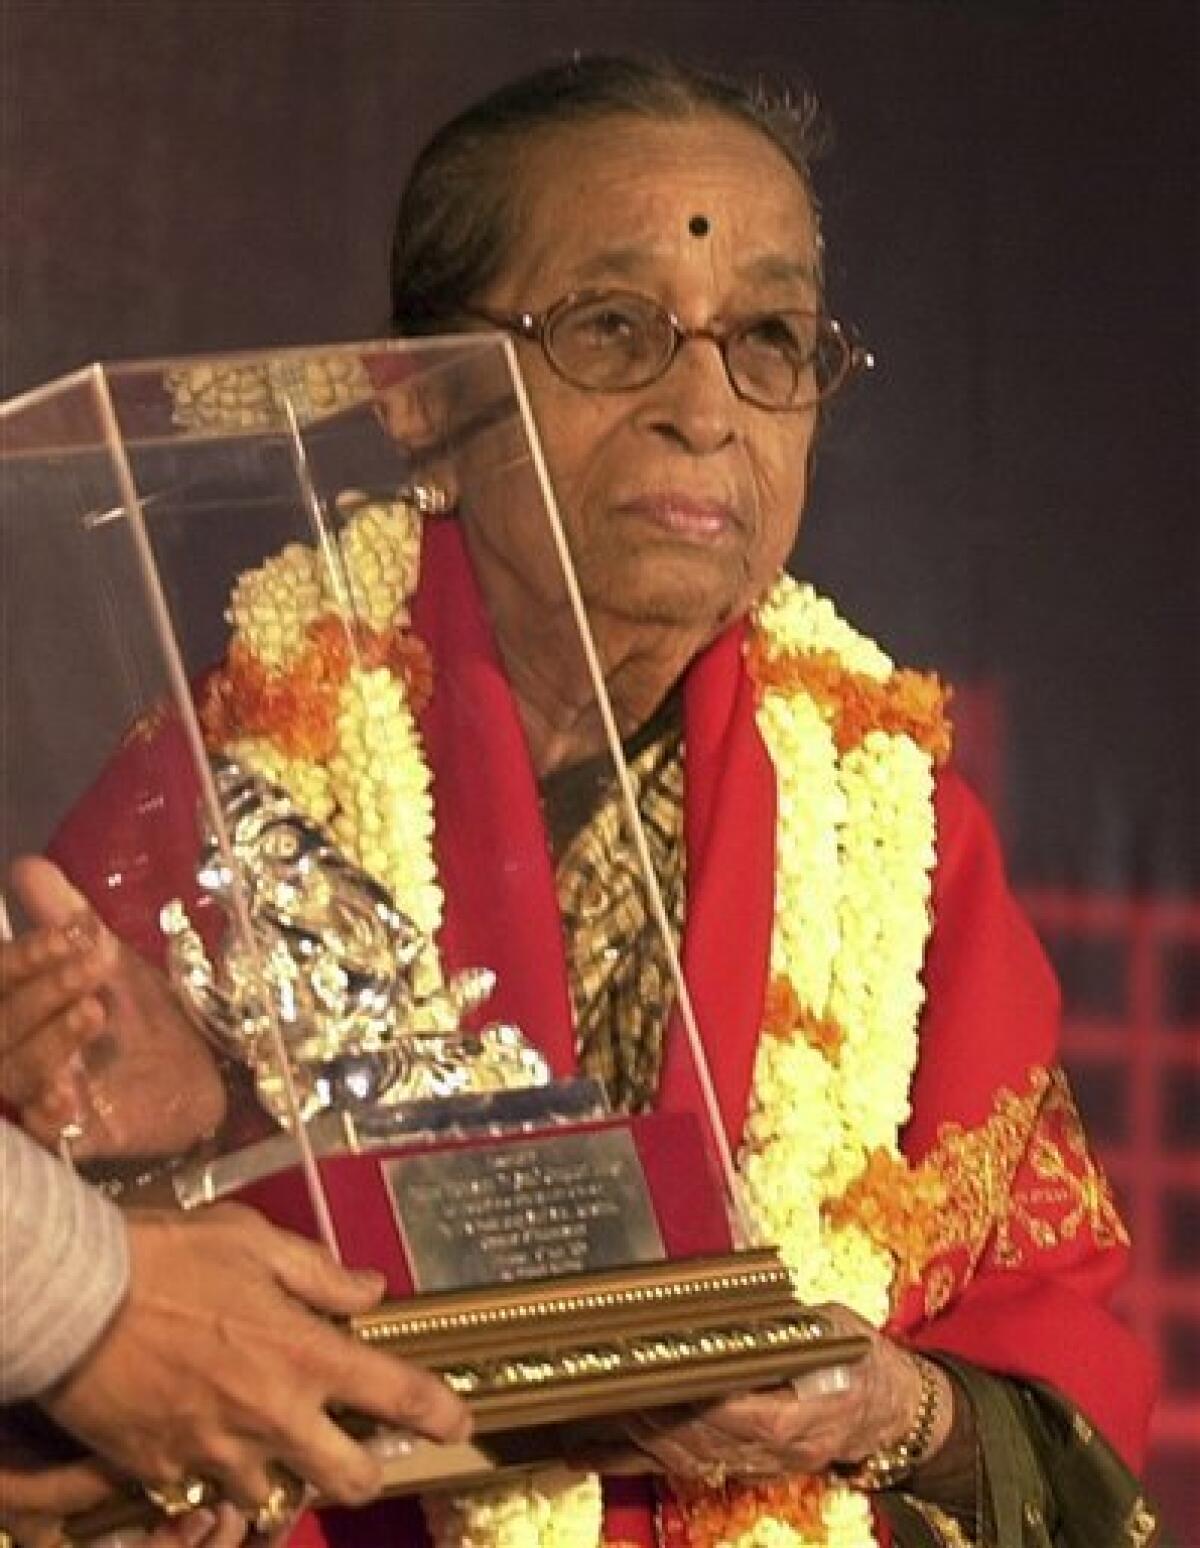 File - In this May 19, 2005 file photo, legendary Indian classical singer Gangubai Hanga is felicitated in Mumbai, India. Hangal, who battled caste and gender prejudices to establish a career that spanned more than seven decades, died Tuesday, July 21, 2009, after being briefly hospitalized for respiratory problems. She was 96. She died in Hubli, a city in Karnataka state, where she lived, PTI added. (AP Photo/Aijaz Rahi, File)